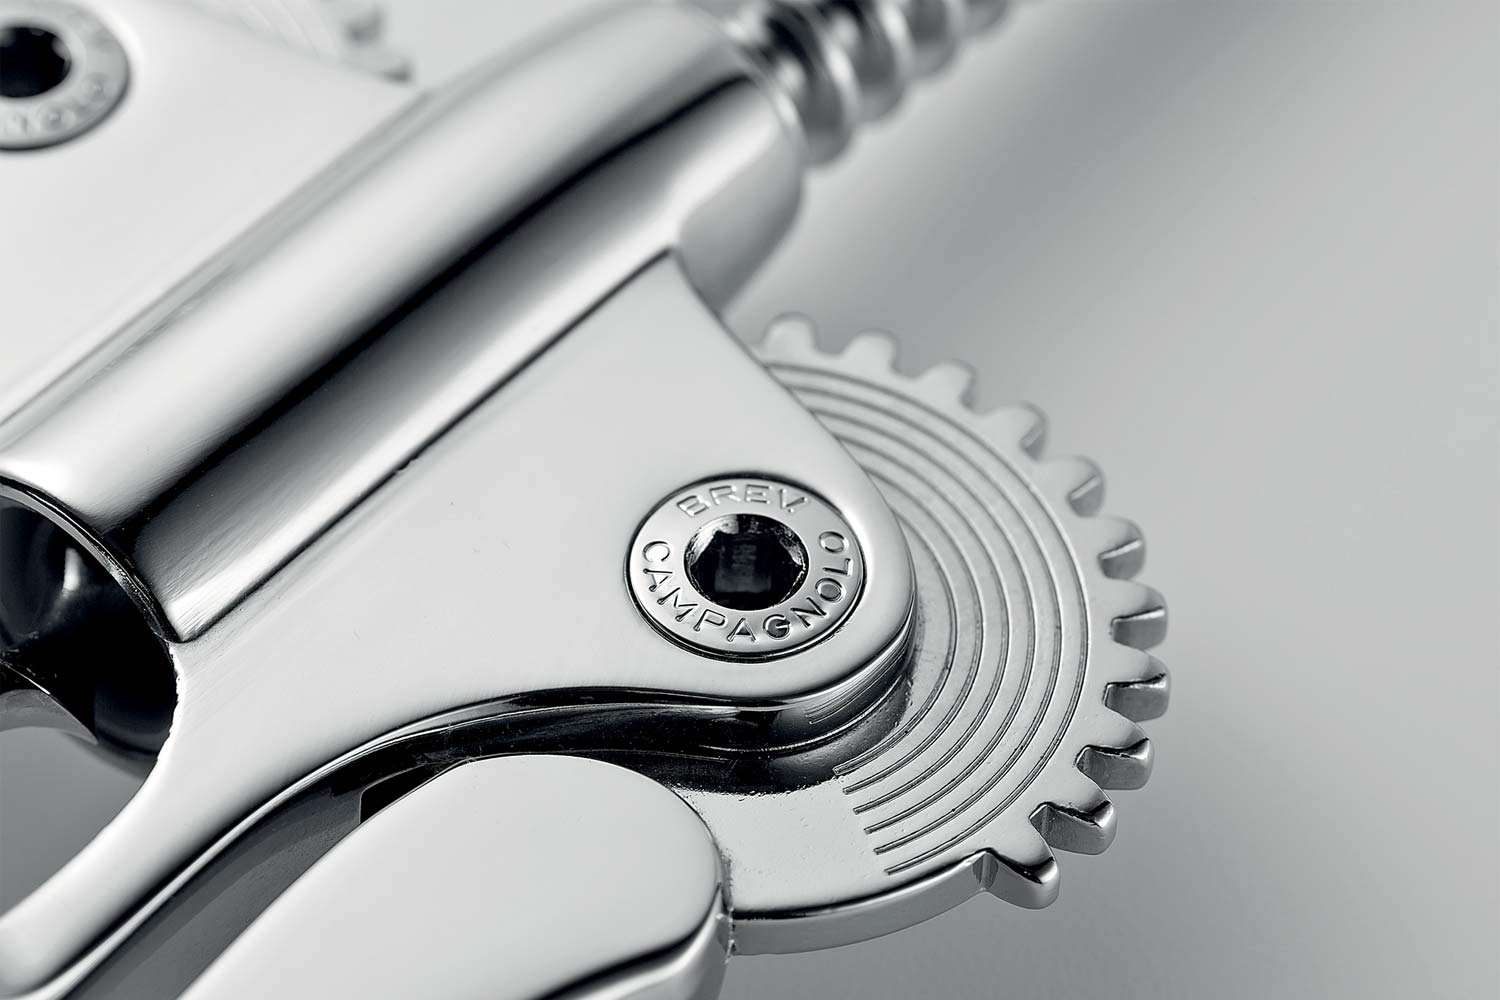 The Big Corkscrew in shiny chrome by Campagnolo